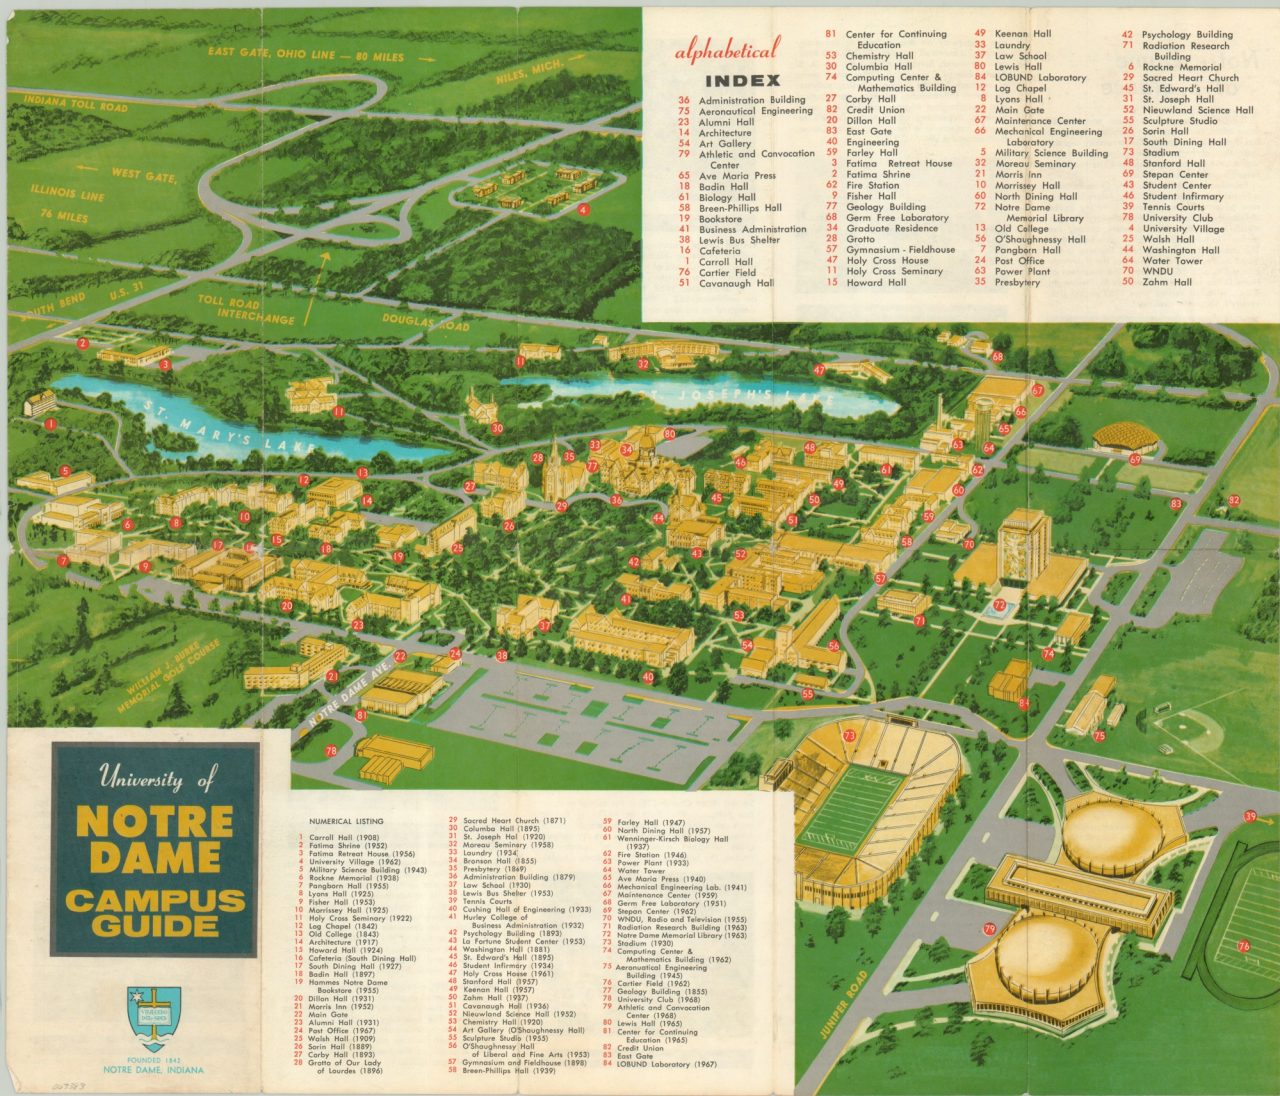 University of Notre Dame Campus Guide | Curtis Wright Maps